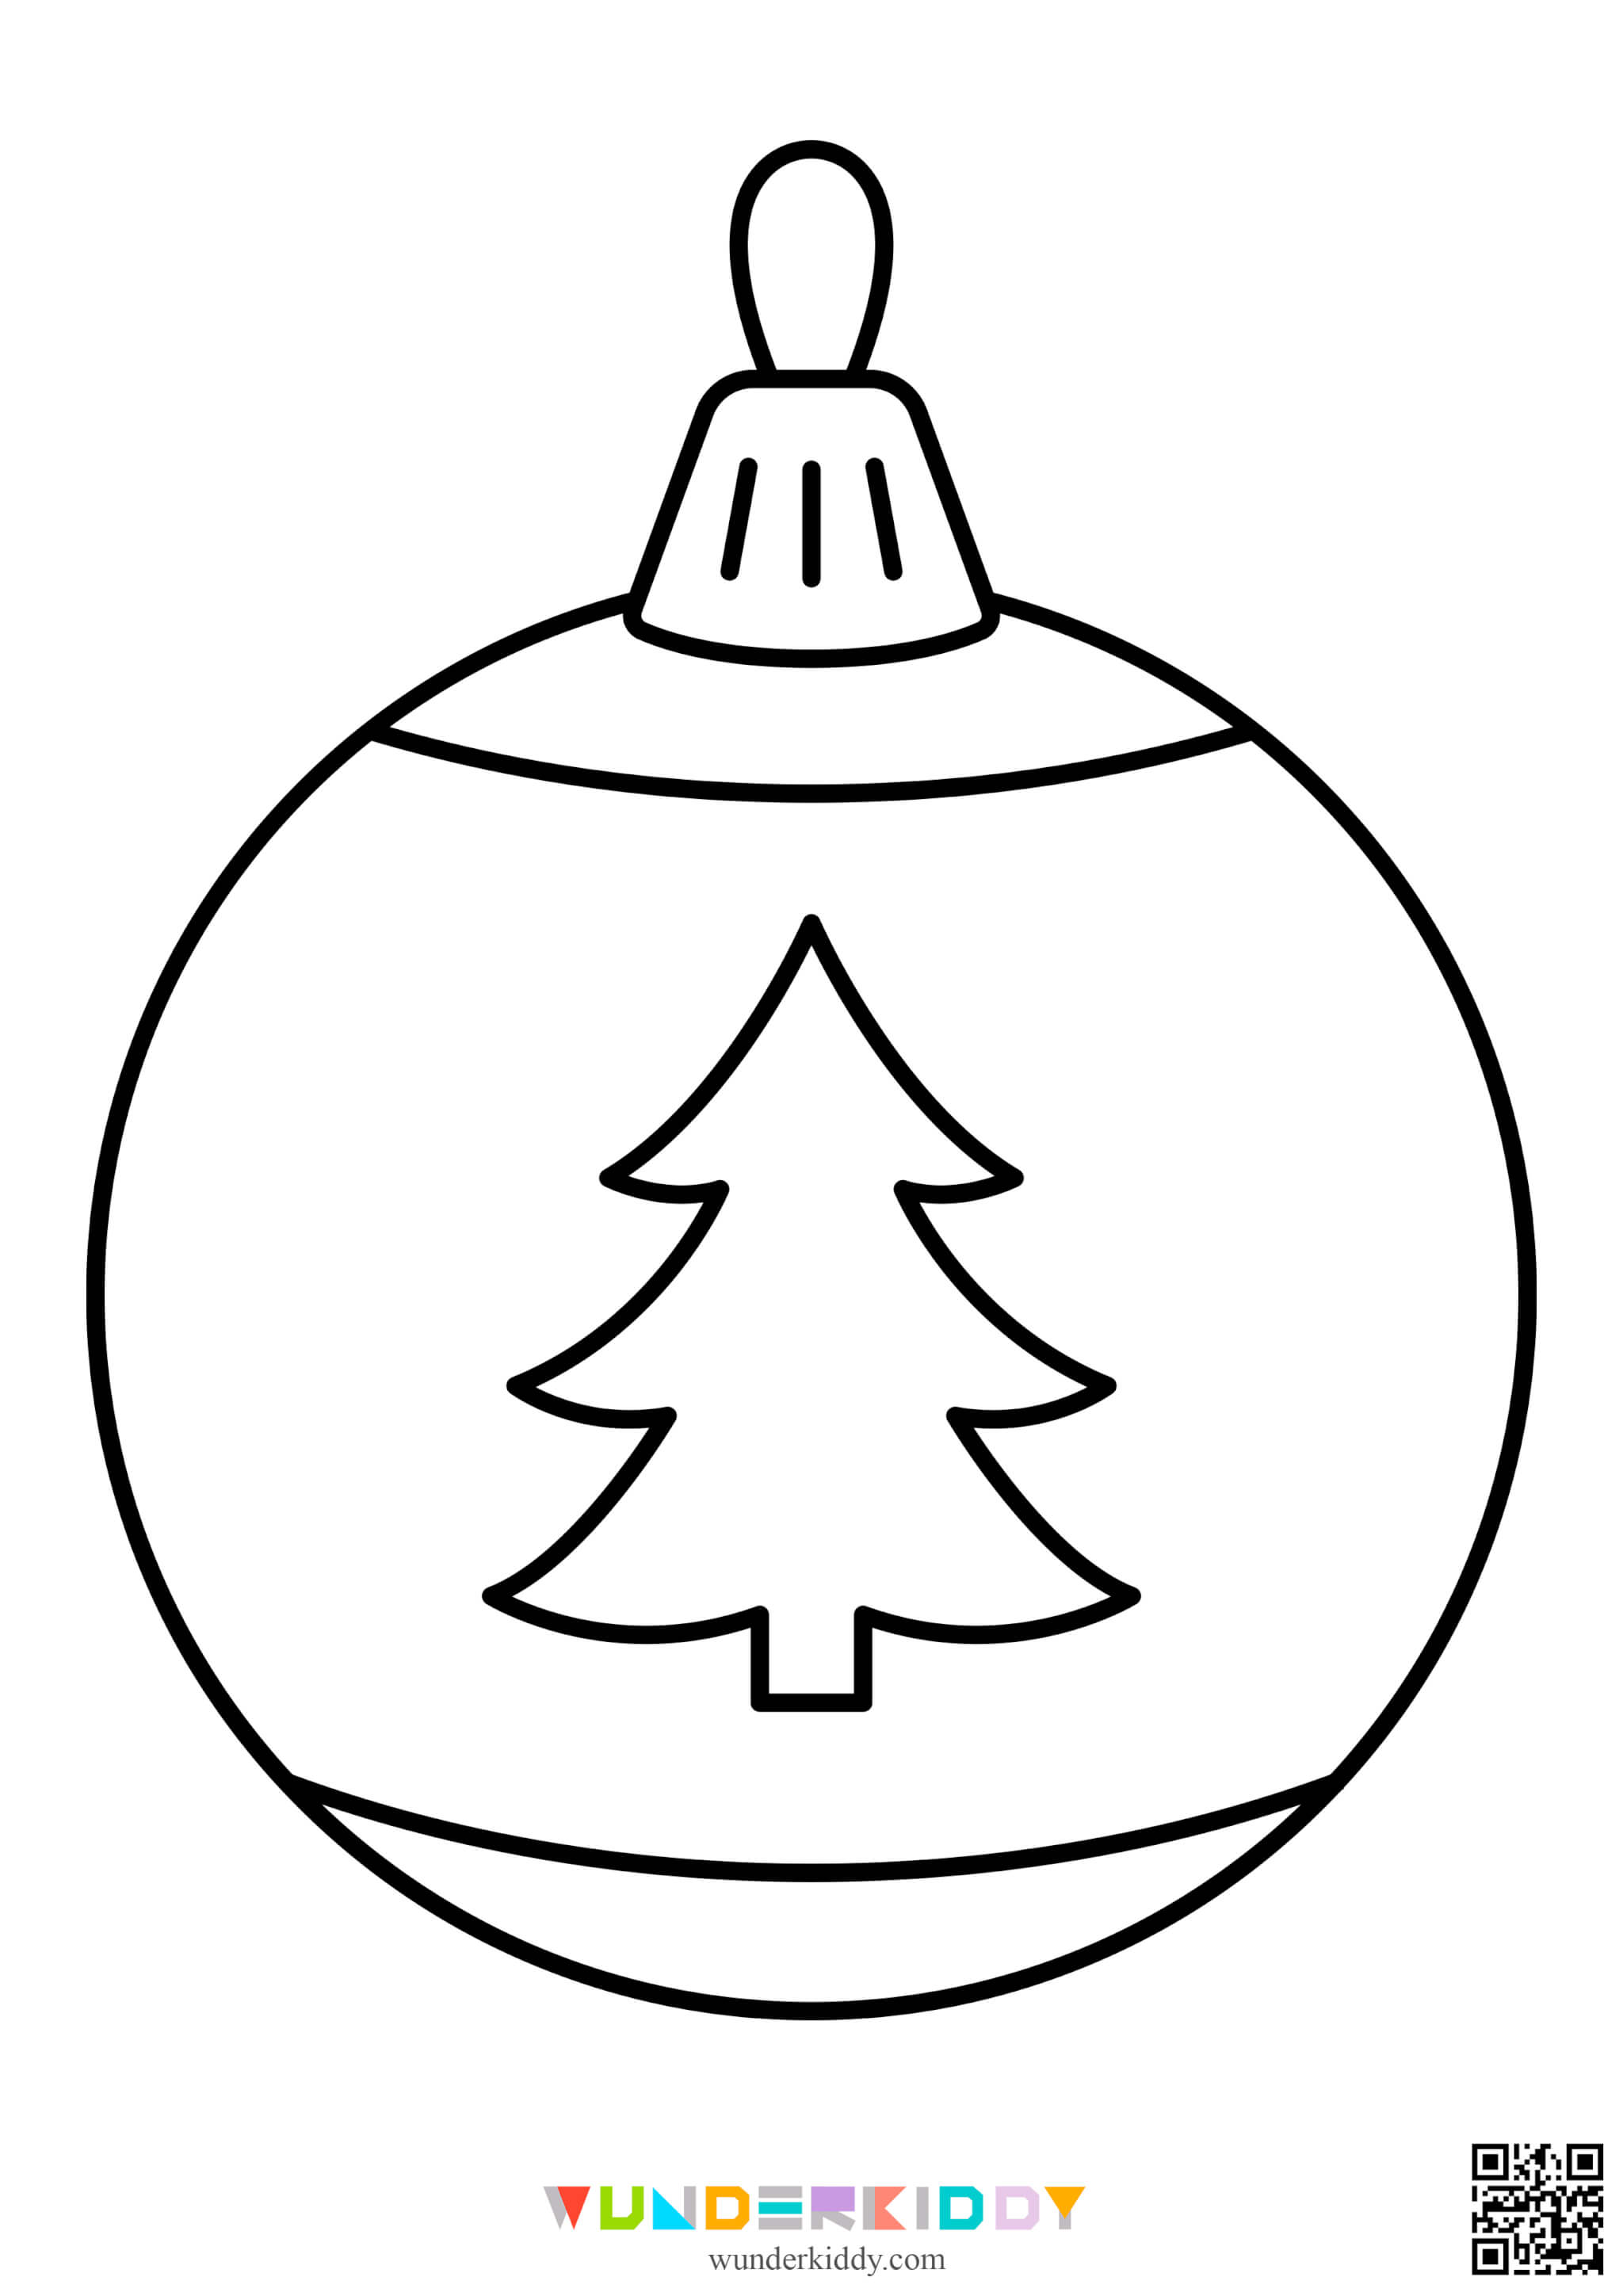 Christmas Ornament Coloring Pages - Image 12